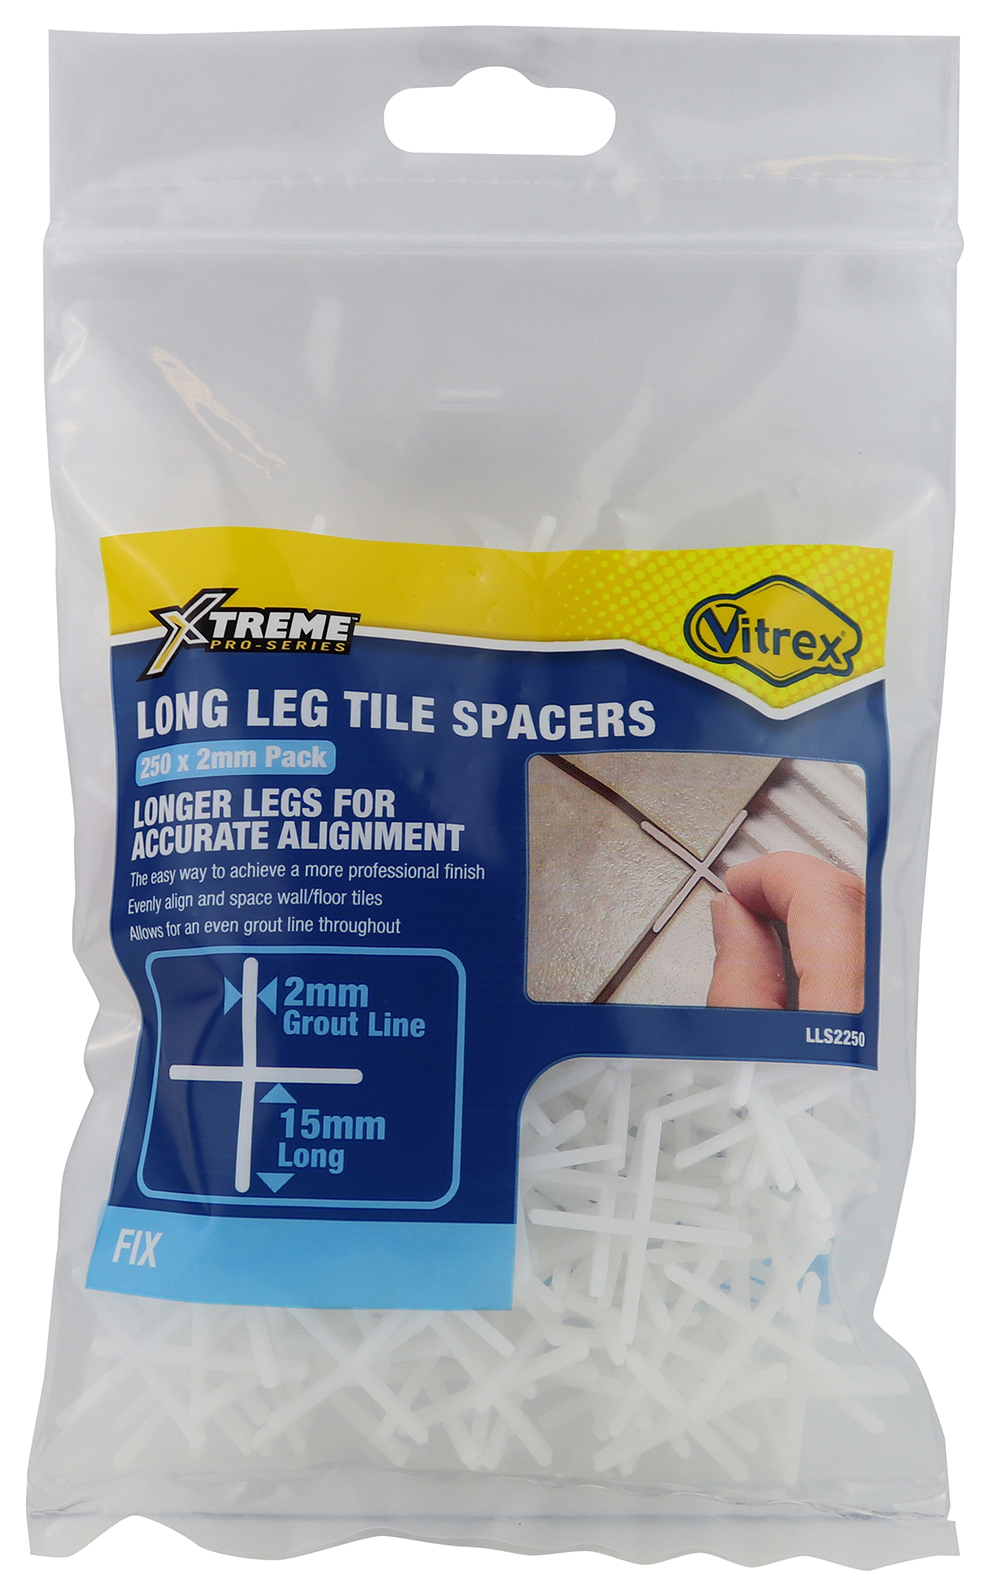 Vitrex 2mm Extreme Long Leg Spacers - Pack of 250